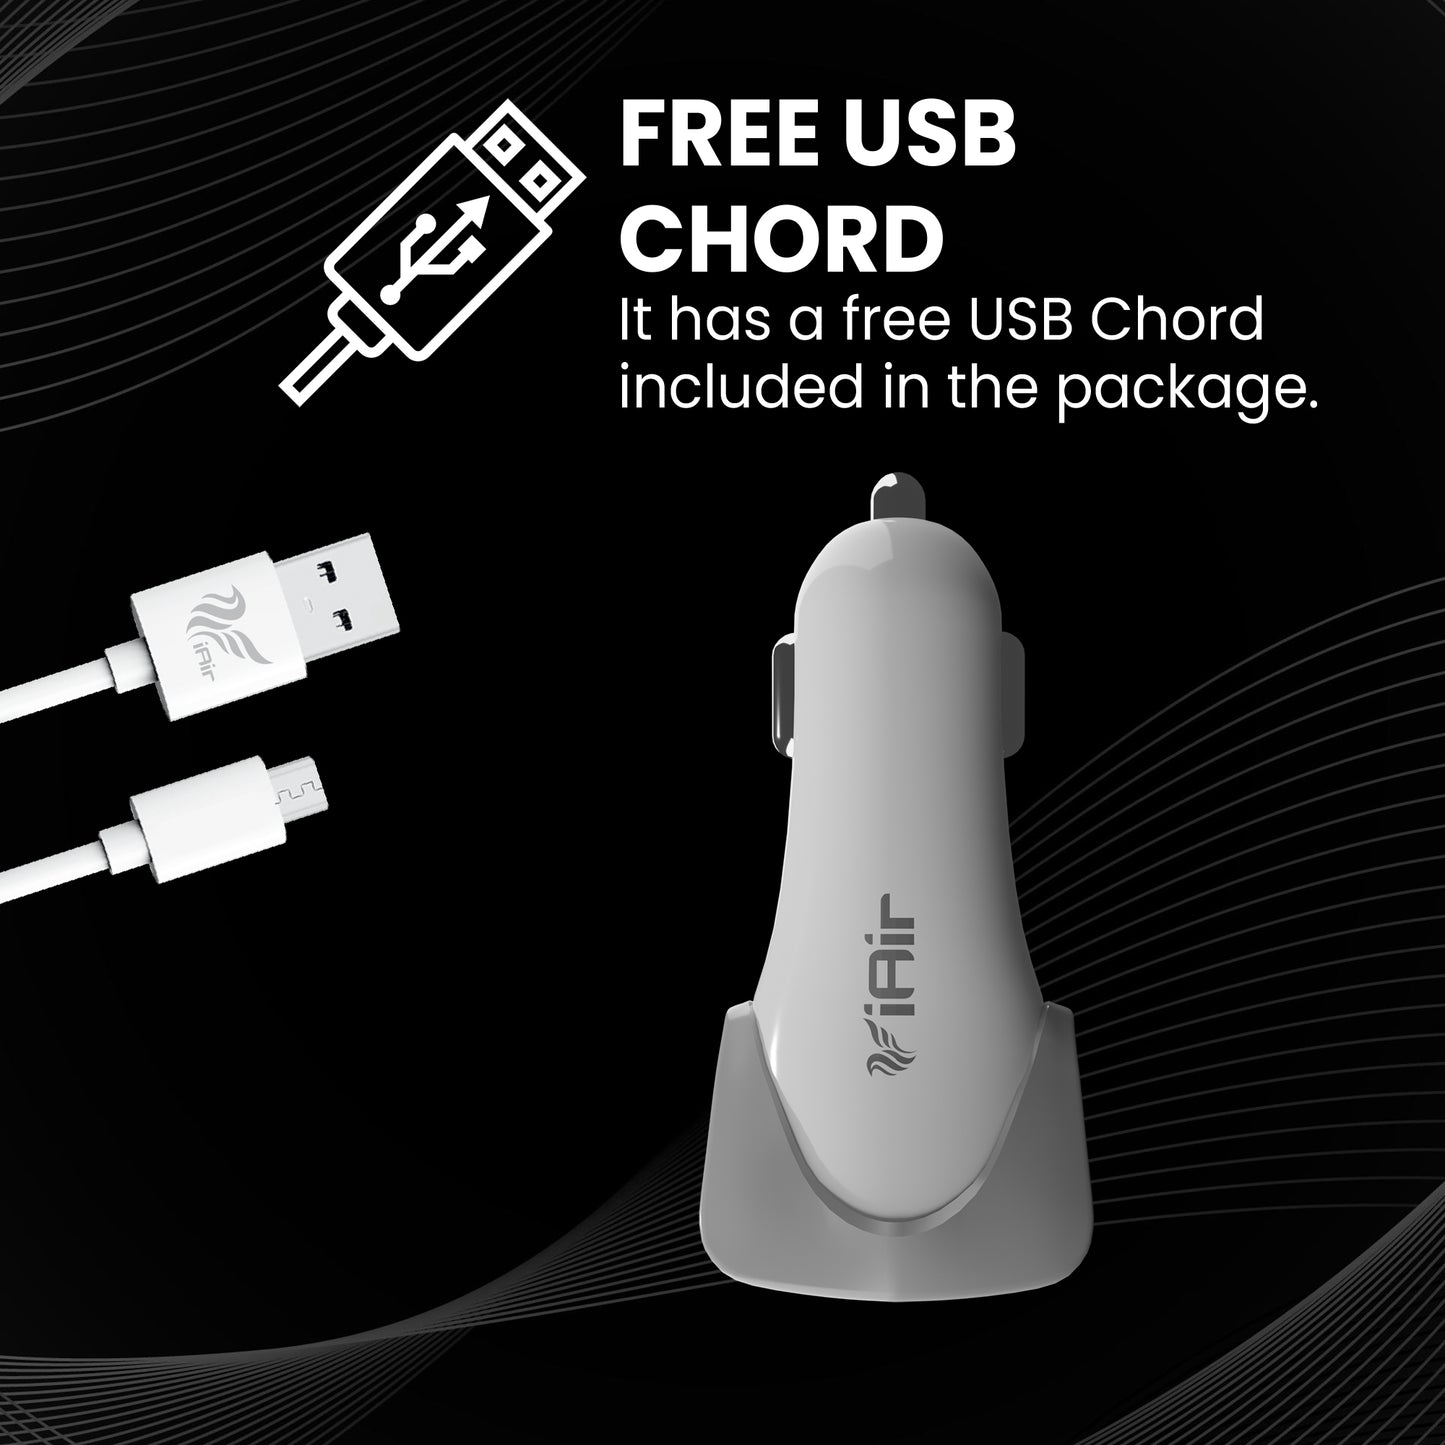 iAir C2 3.0amp Fast Car Charger, Dual USB Output, Multi-Layer Protection, Fast Charging, Compatible with All Cars, Mobiles & Other USB Enabled Devices